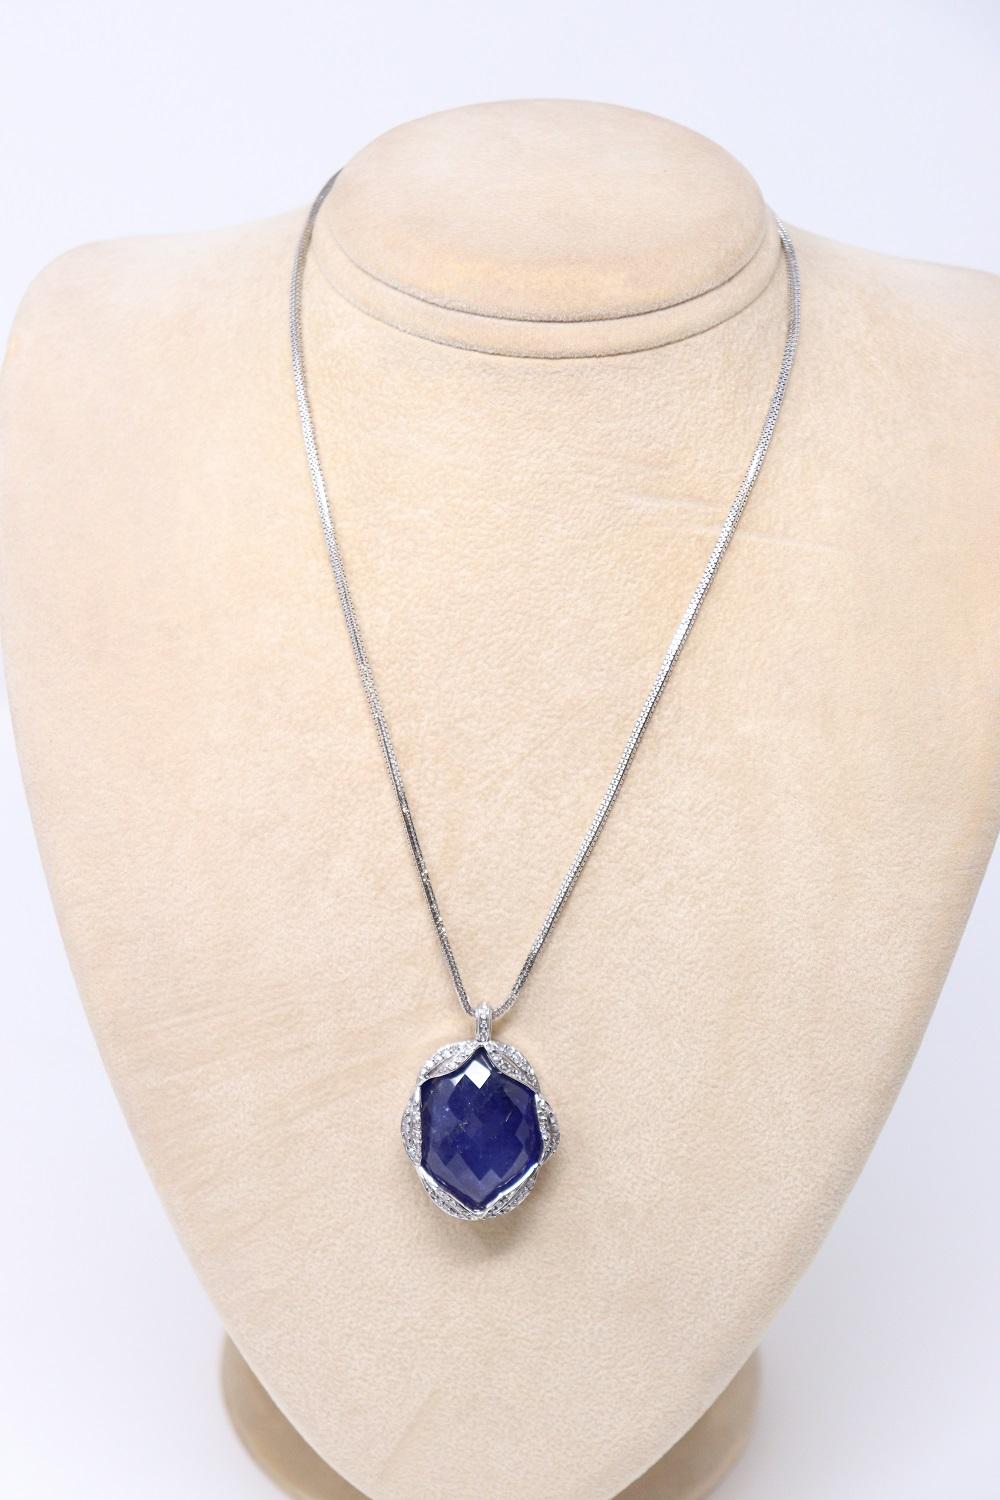 65 Ct Tanzanite and Diamond Pendant Necklace in 18 Kt White Gold For Sale 2